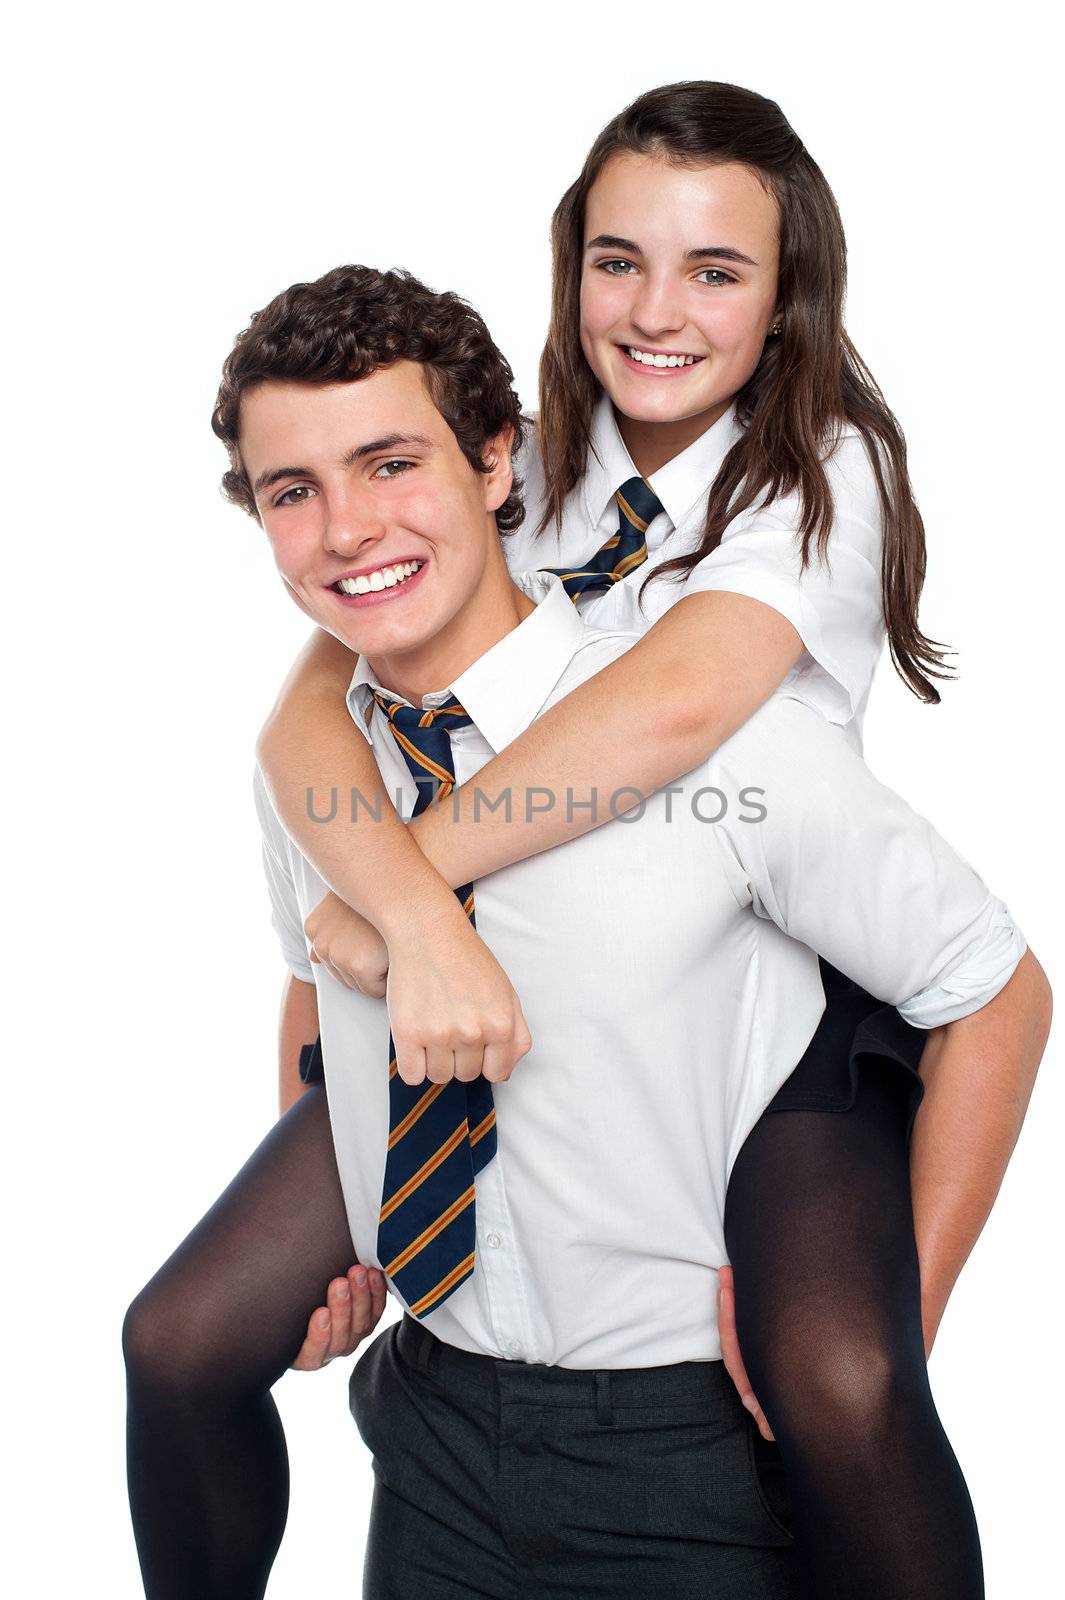 Cheerful shot of youngster riding piggyback in school uniform and having fun